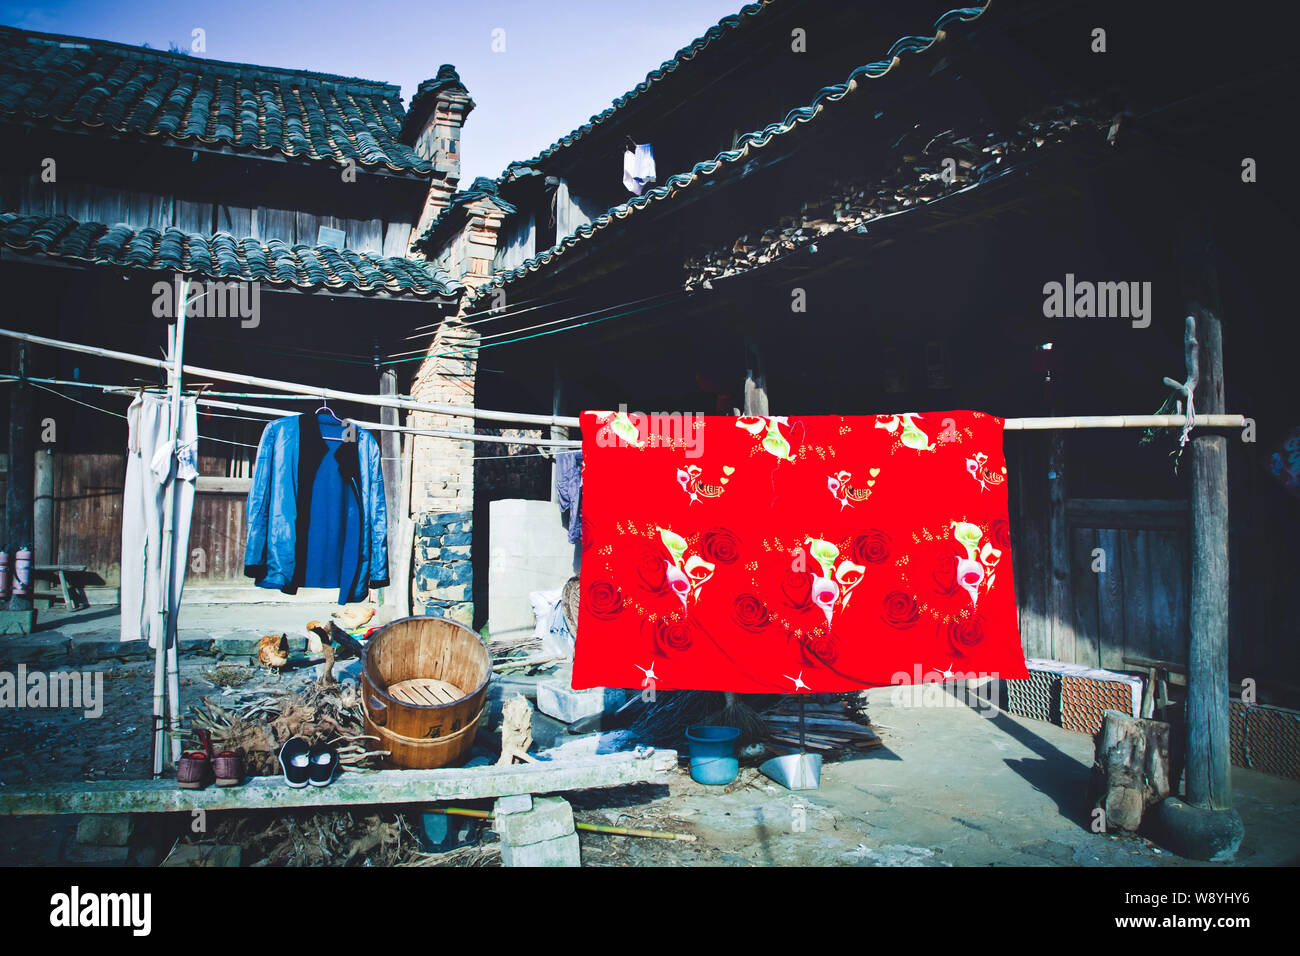 Local Chinese residents use bamboo poles to air out clothes in front of houses in Heishi Village, PanAn county, east Chinas Zhejiang province, 23 Nove Stock Photo